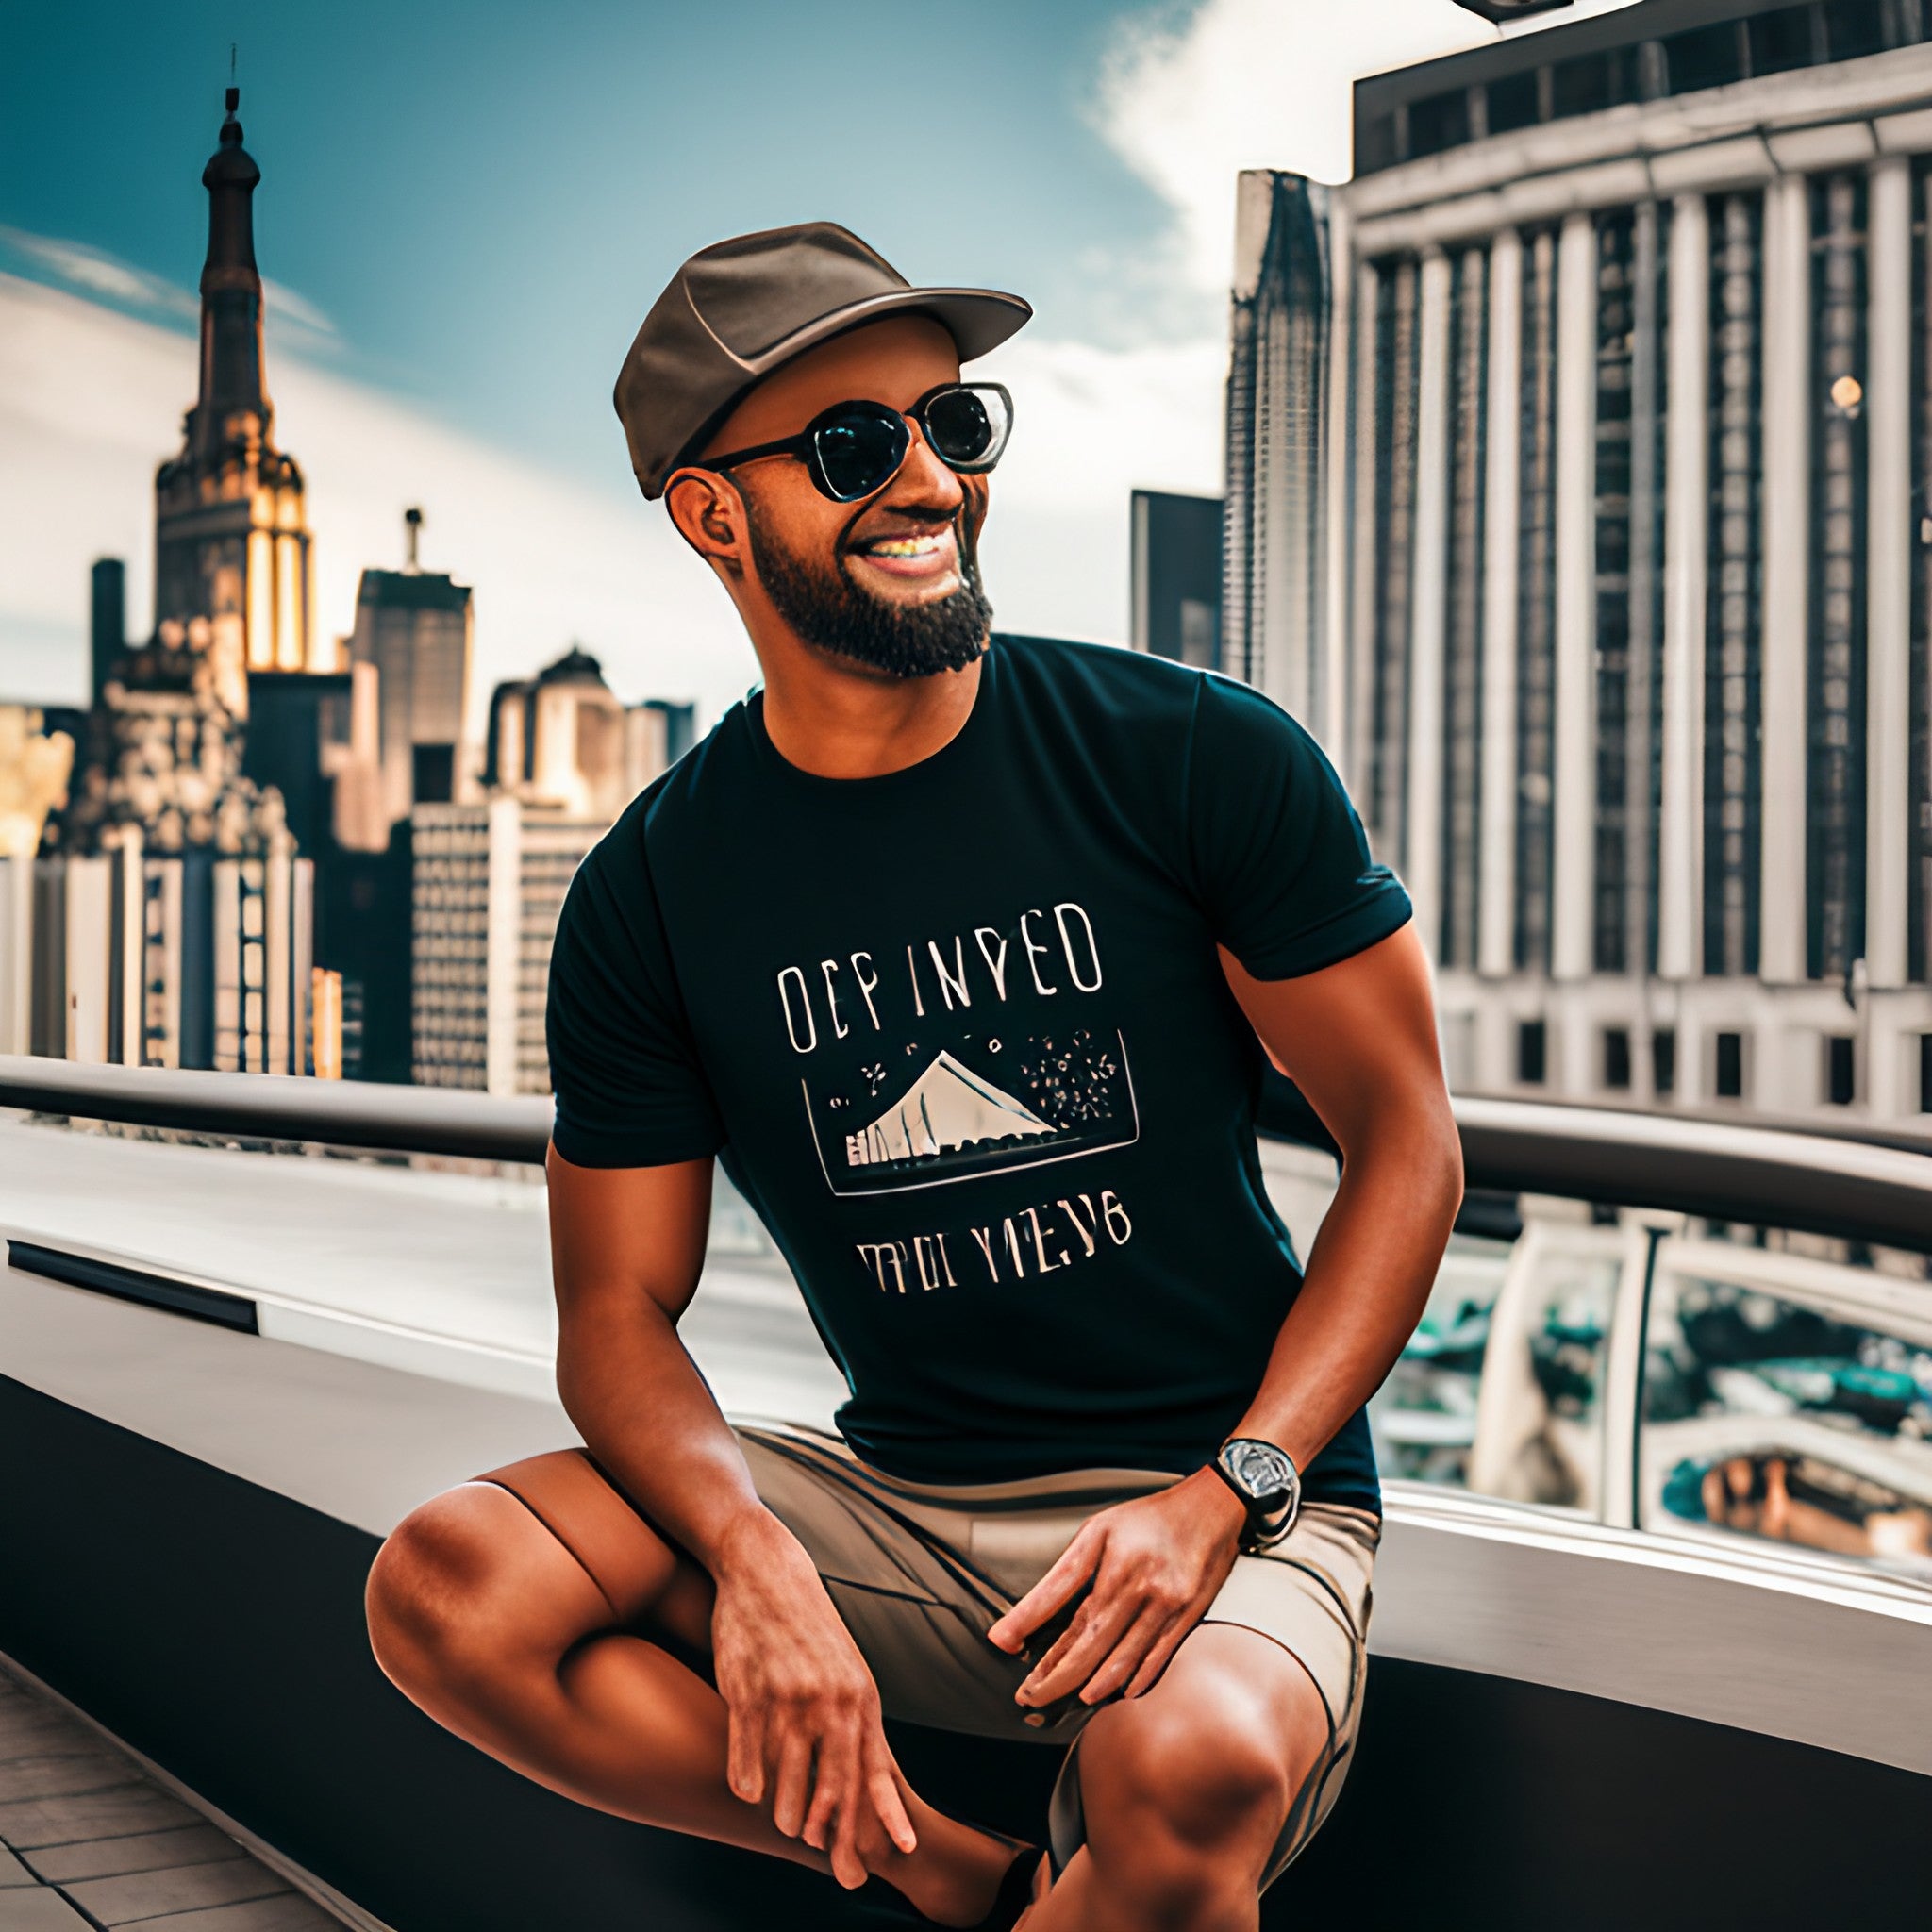 Travel Quotes T-Shirts: The Celebrity-Endorsed Trend You Need to Try